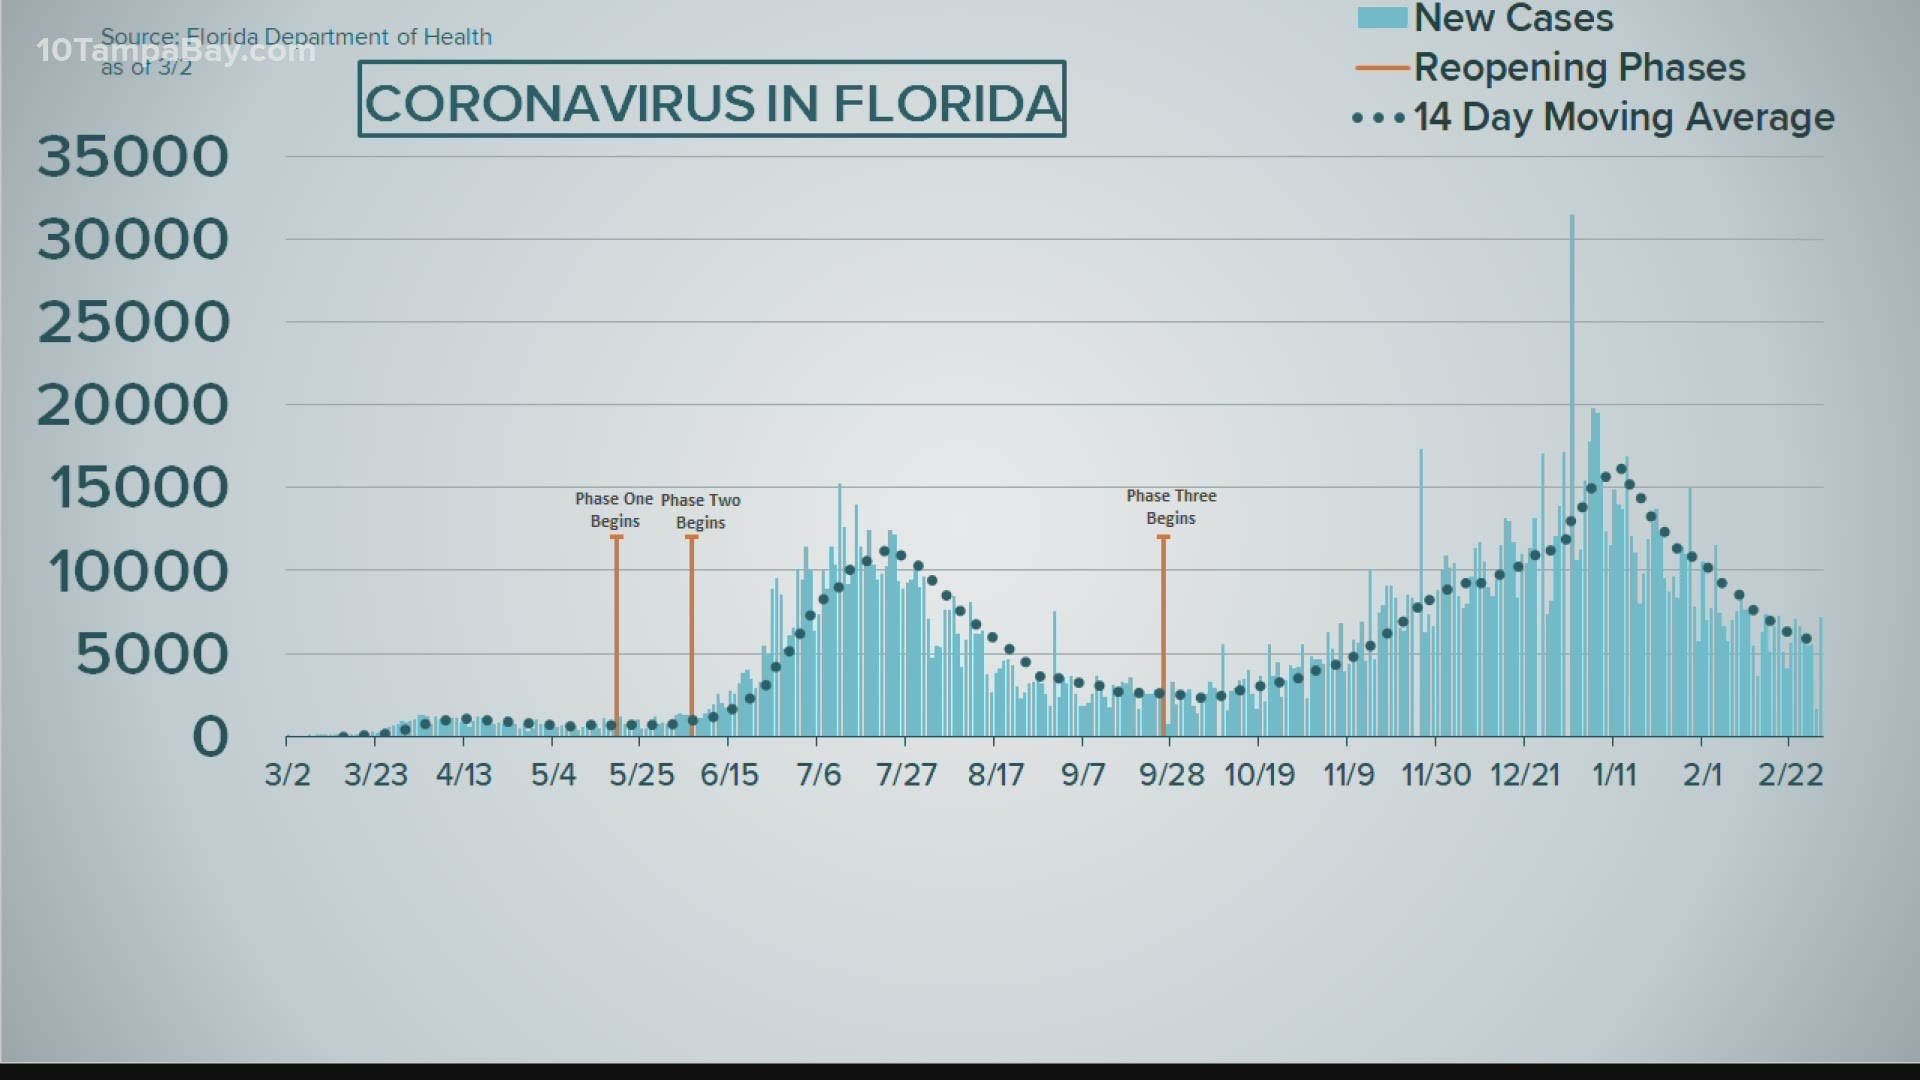 A total of 1,918,100 people in Florida have tested positive for coronavirus since the pandemic began.